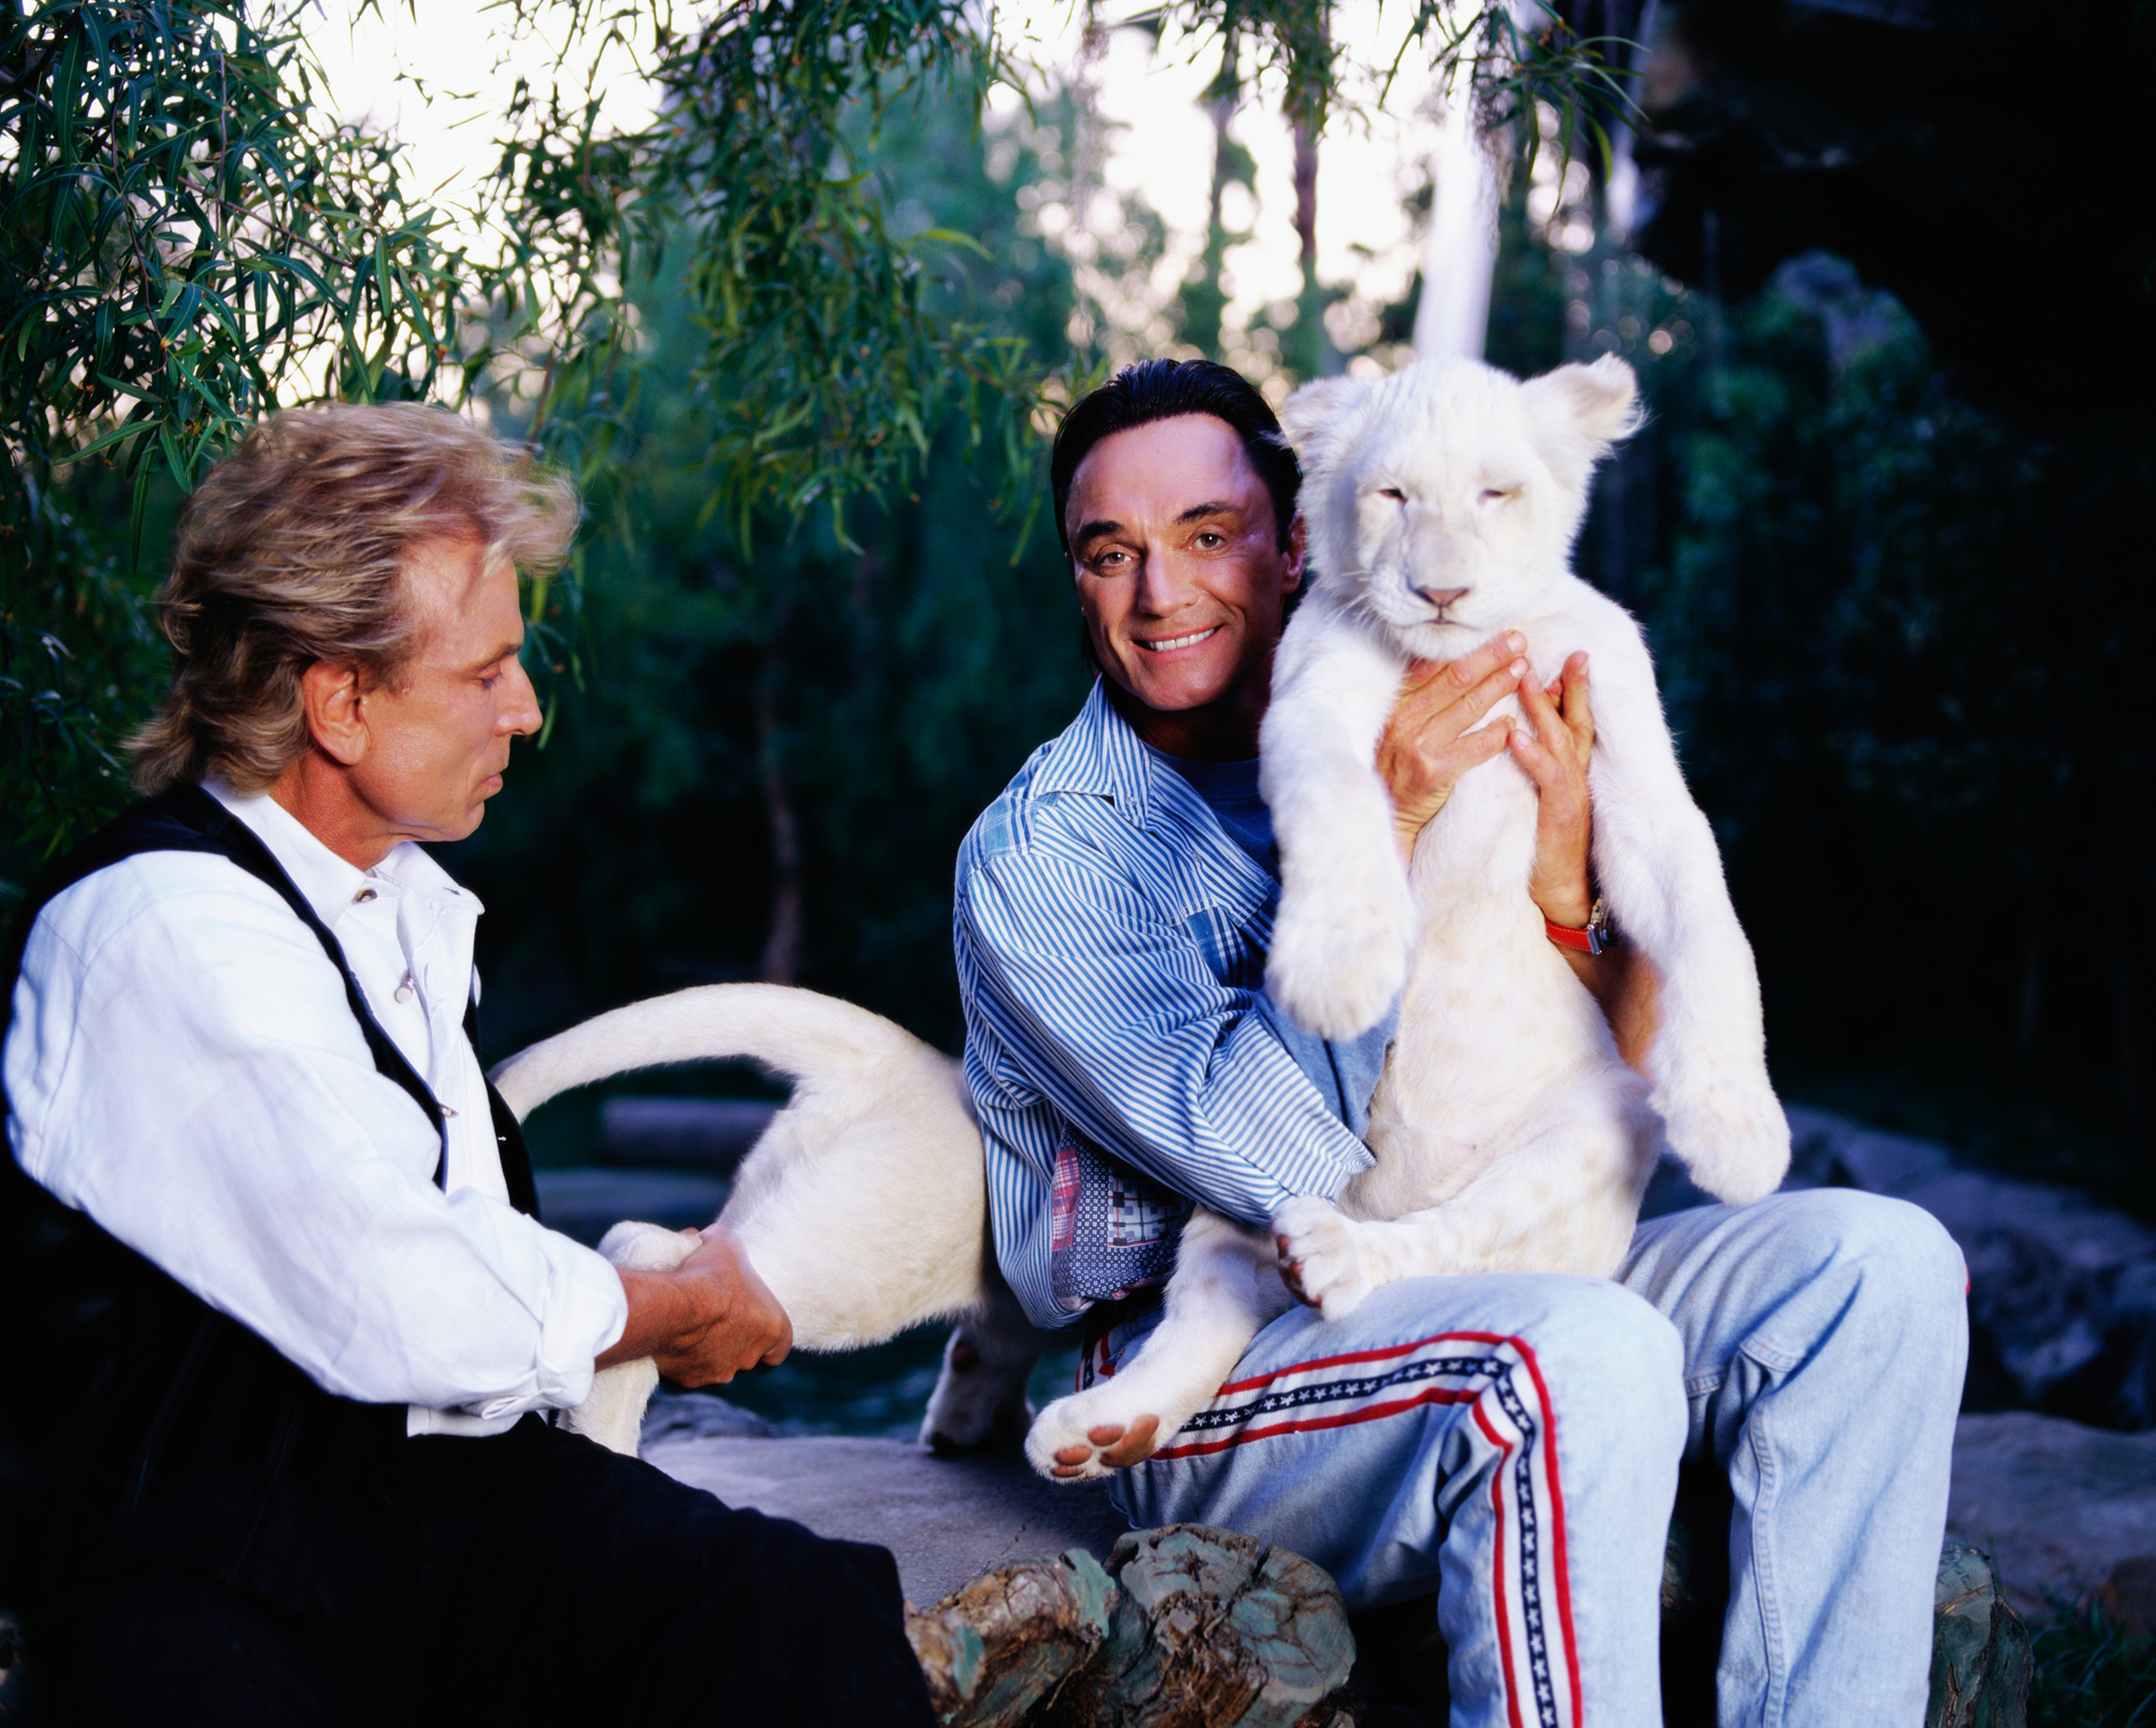 Siegfried & Roy photographed in 1997